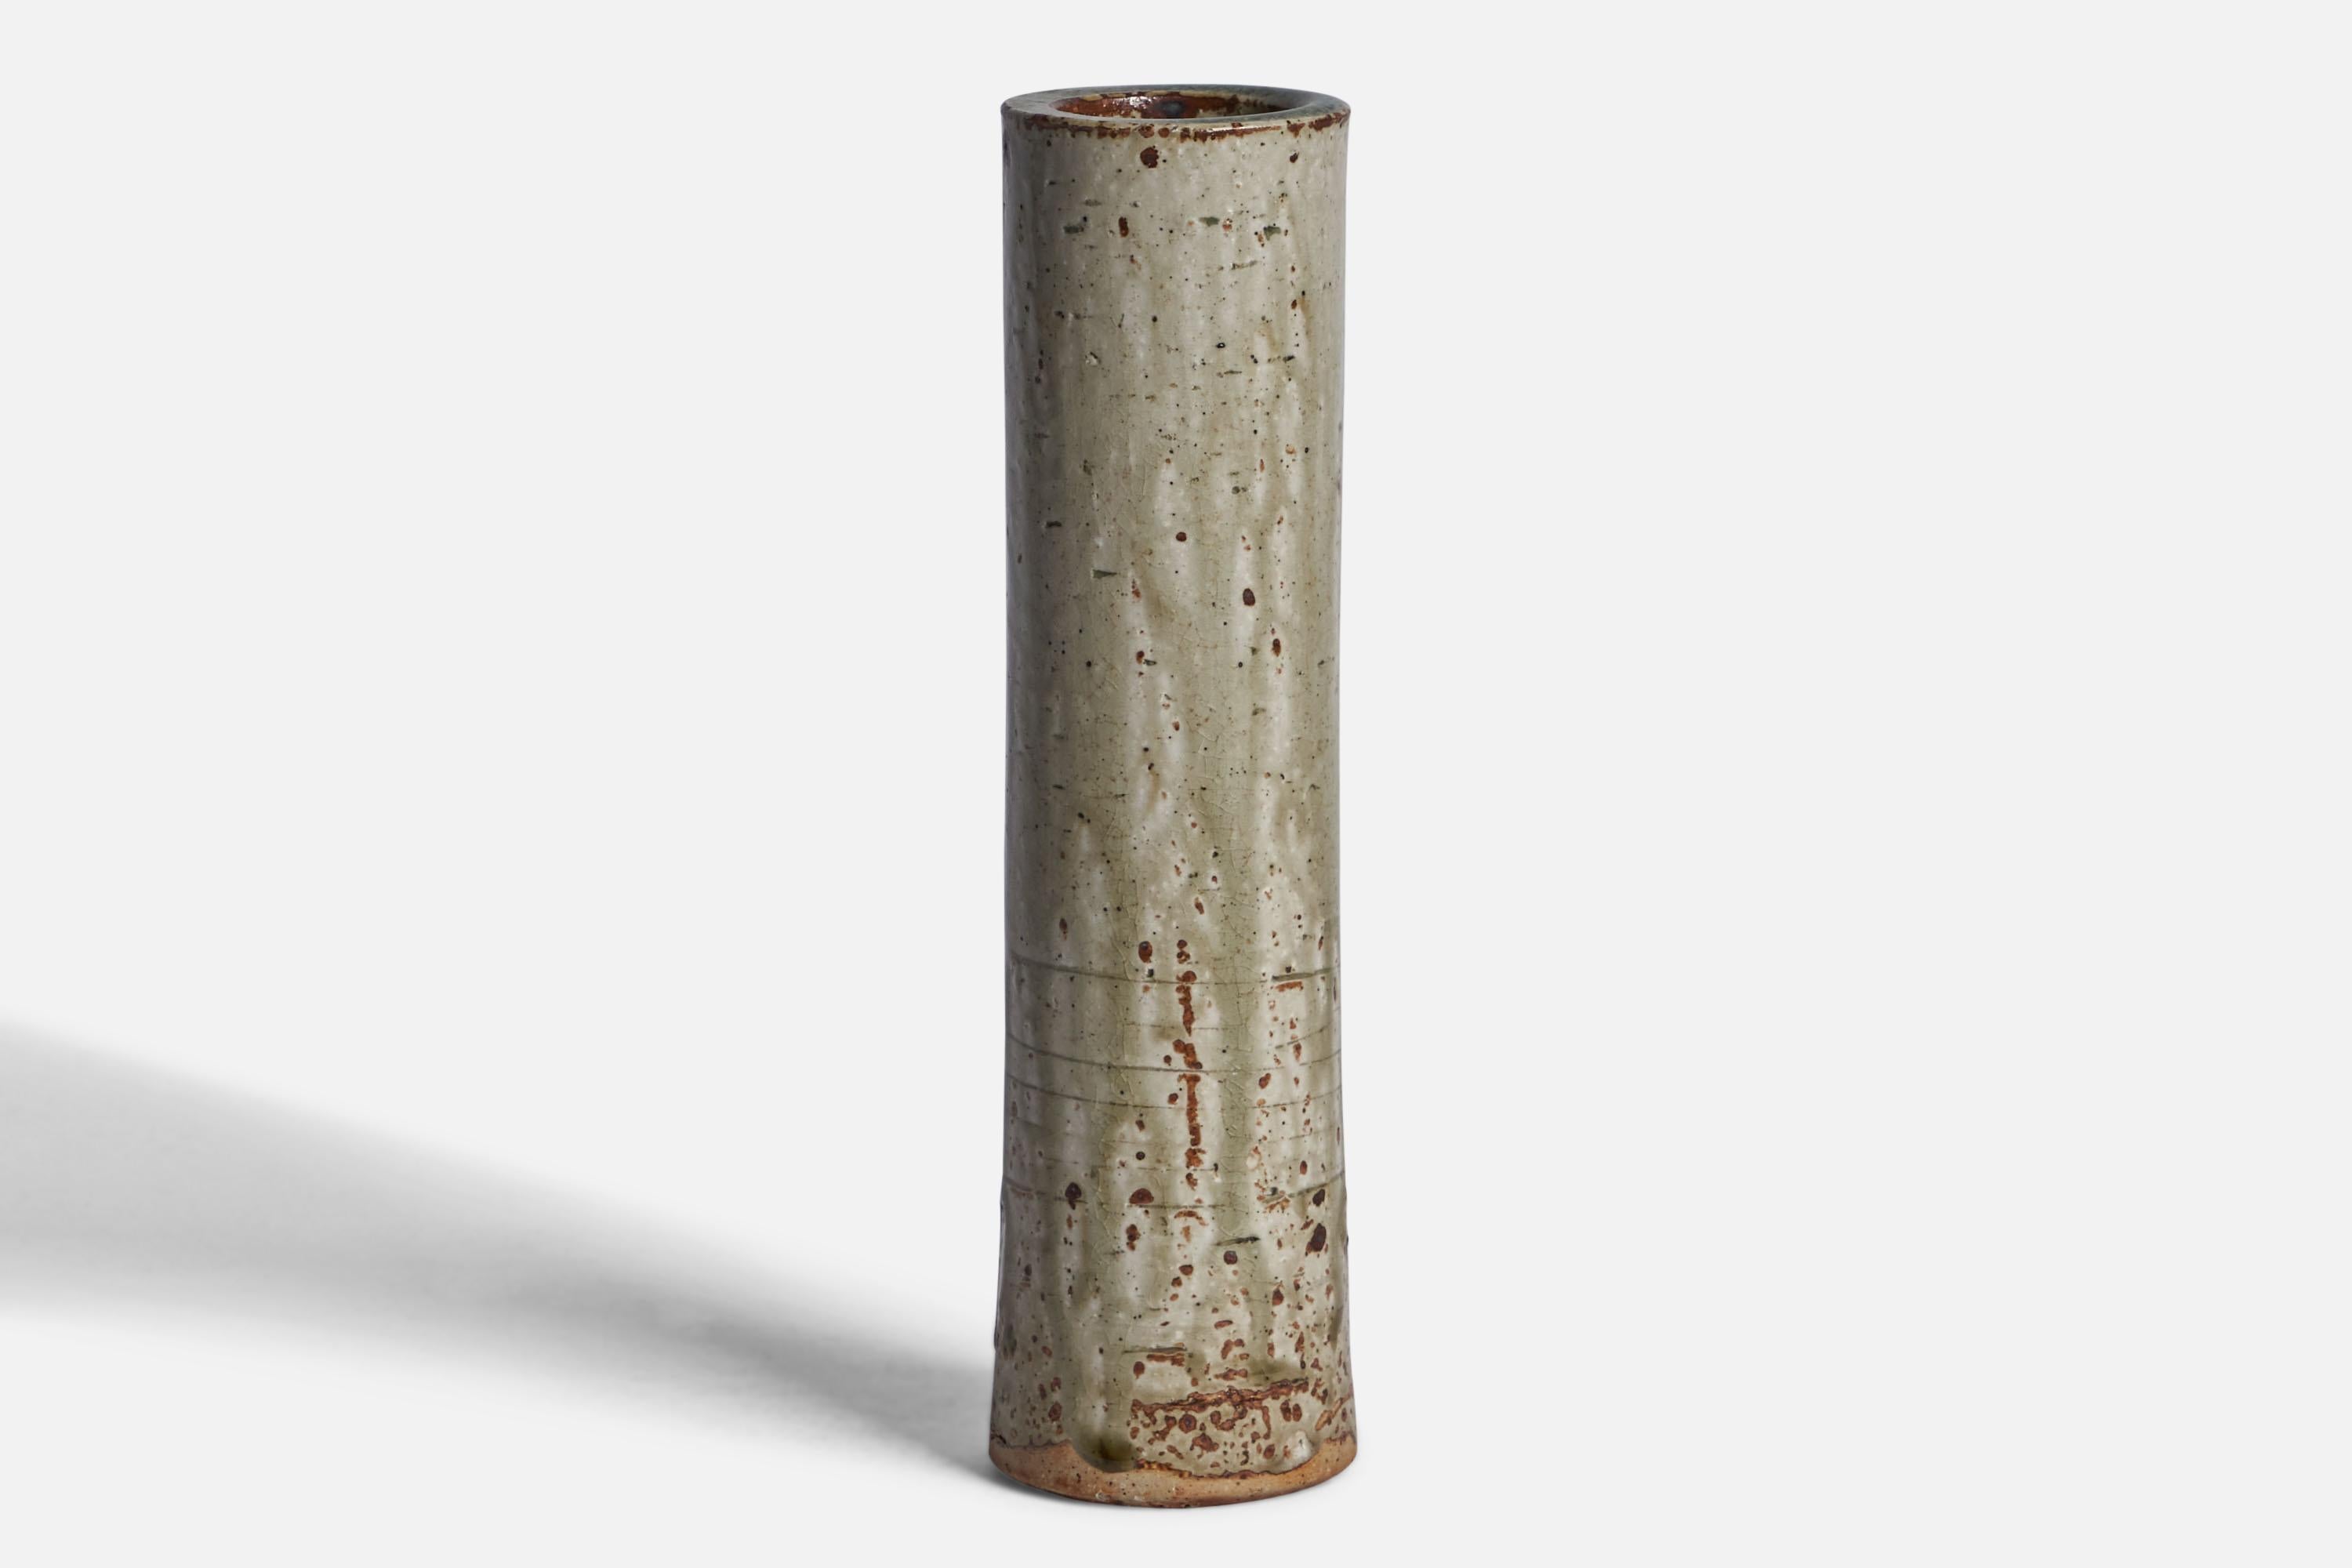 A grey-glazed stoneware vase designed by Marianne Westman and produced by Rörstrand, Sweden, 1960s.